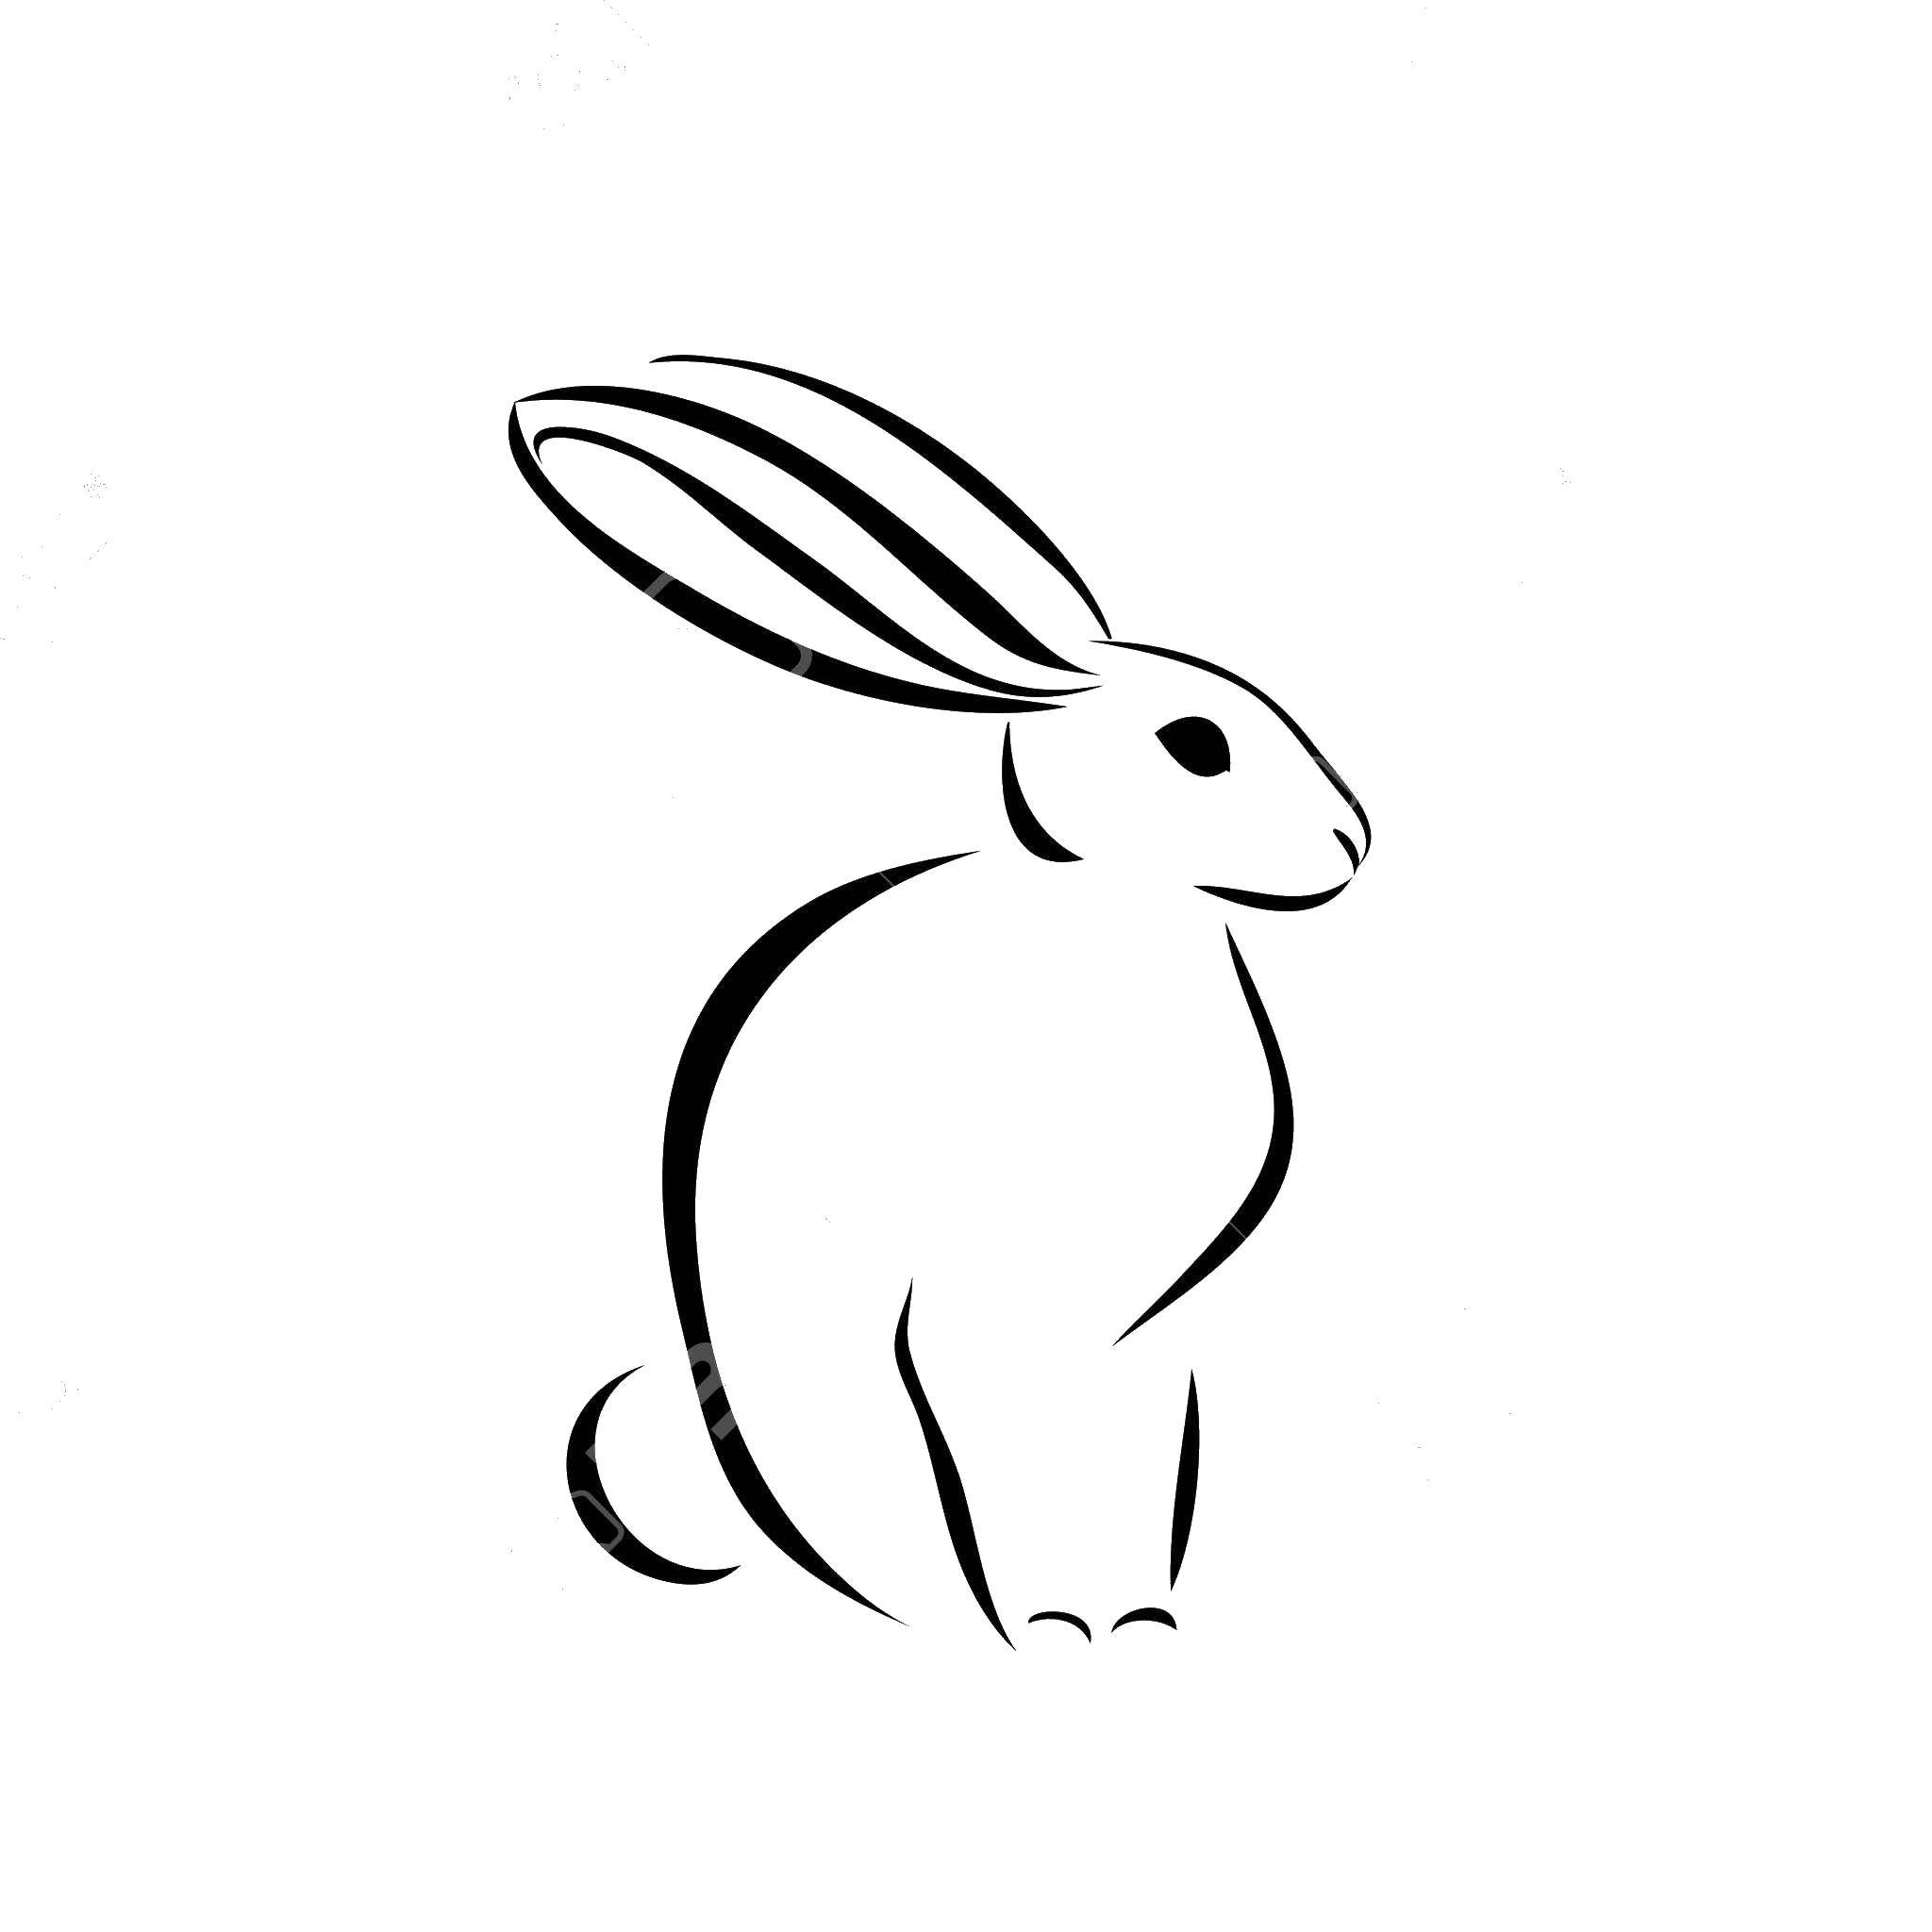 Coloring Rabbit. Category The contour of the hare to cut. Tags:  outline , rabbit, hare.